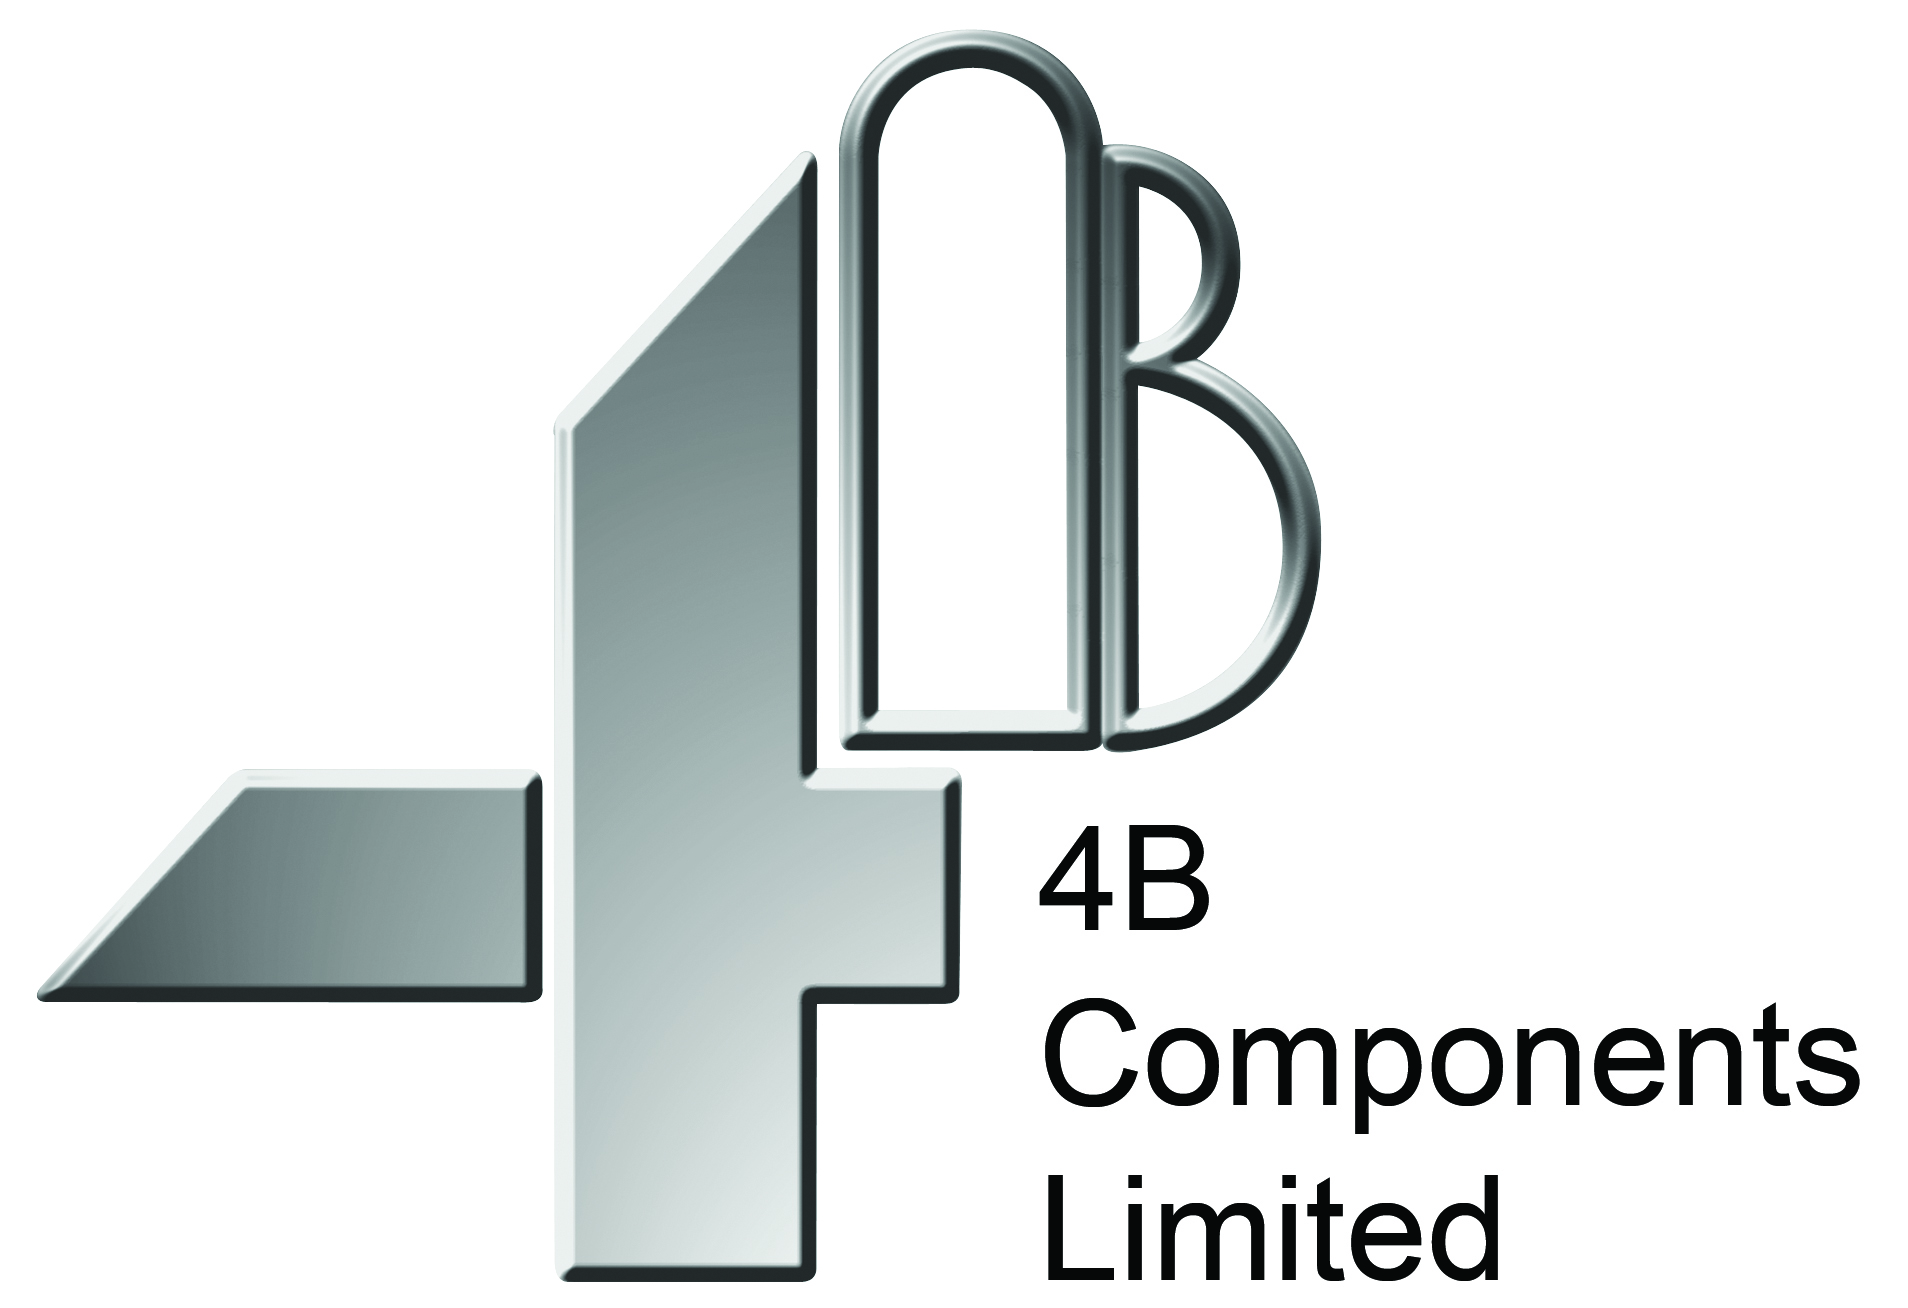 4B Components limited 